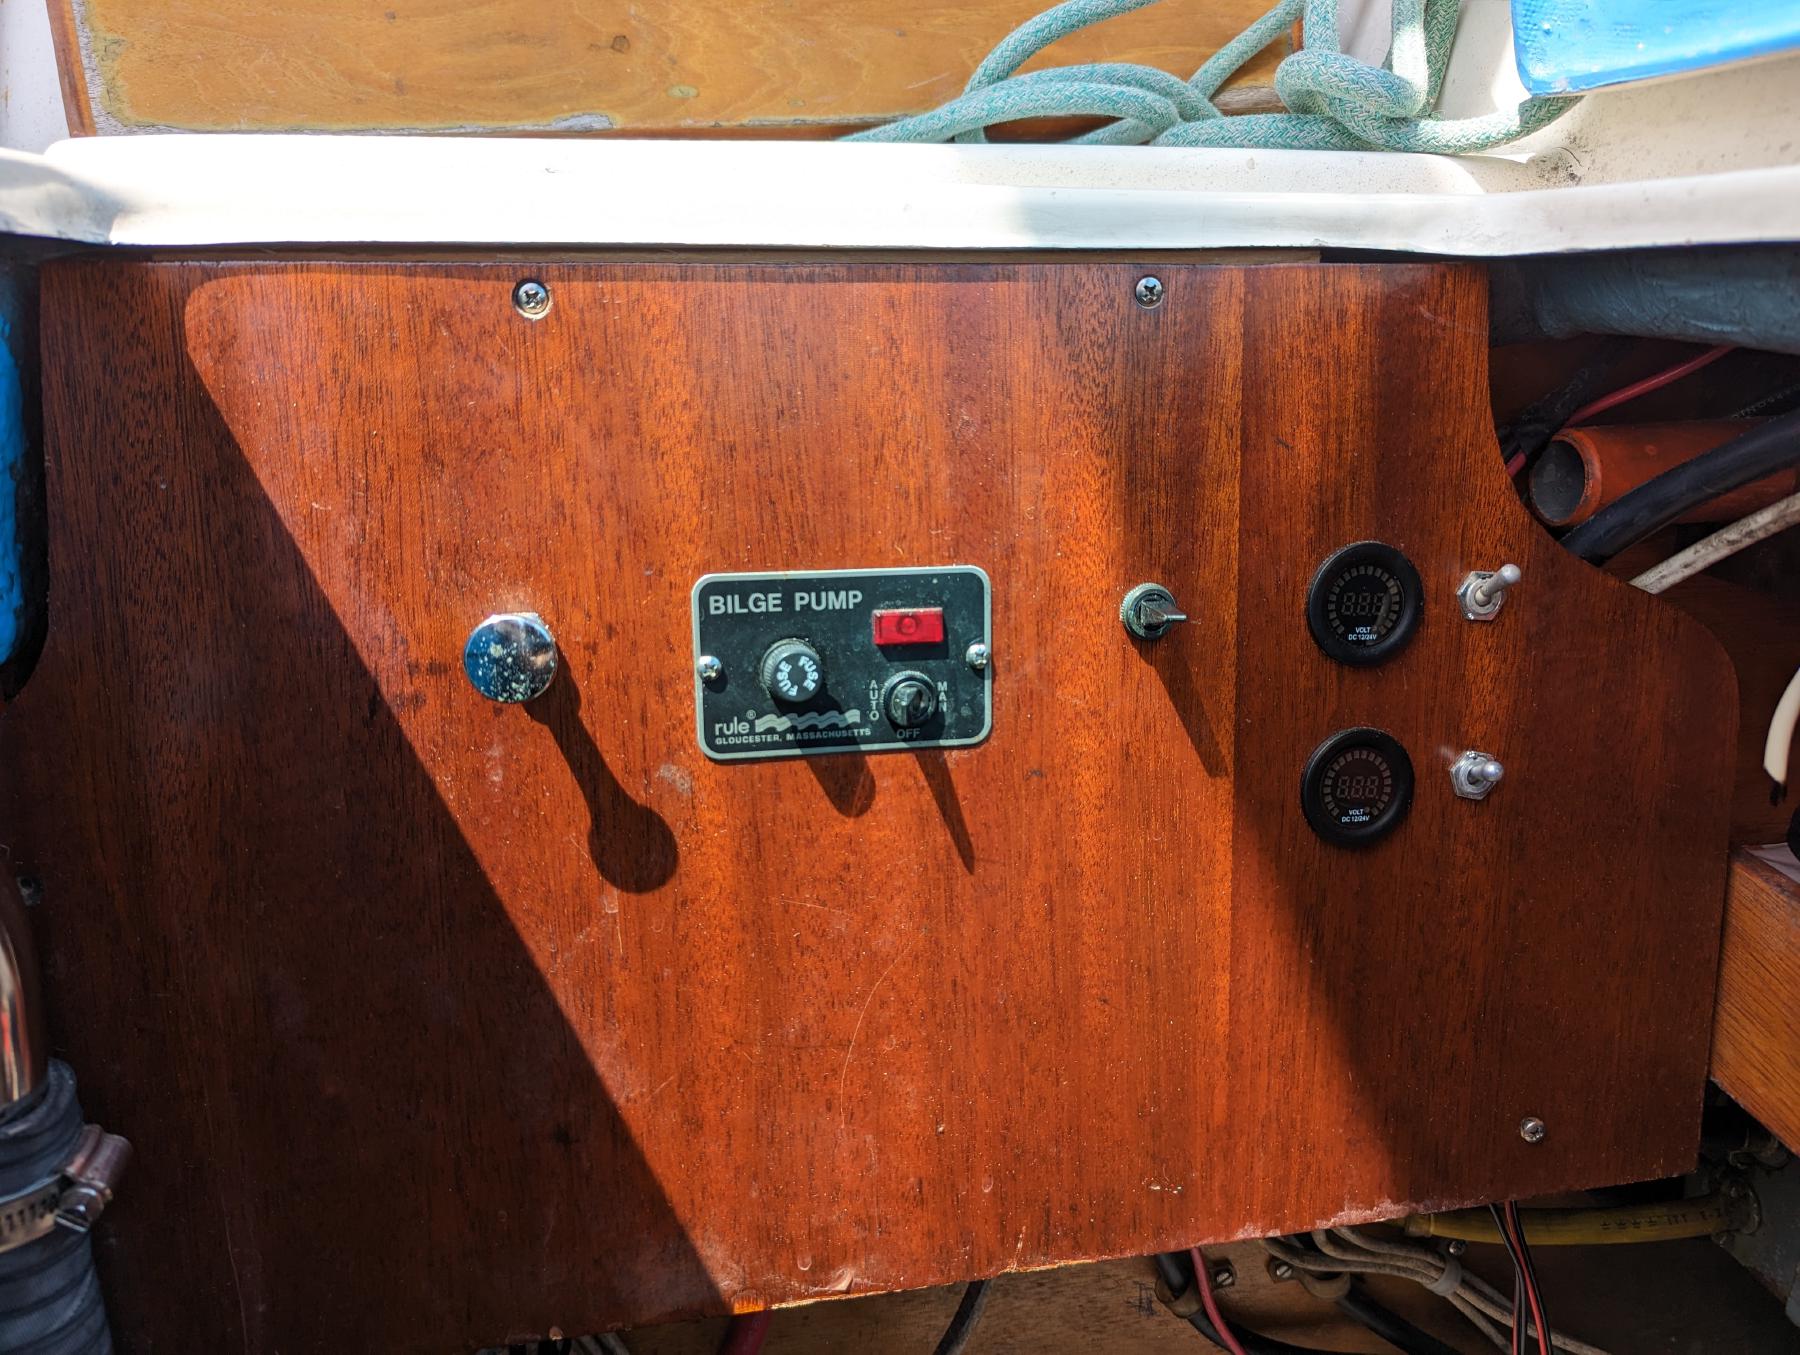 Starboard cockpit locker panel before correcting the battery switches. The blower switch on the left and the black switch towards the right are not connected to anything.